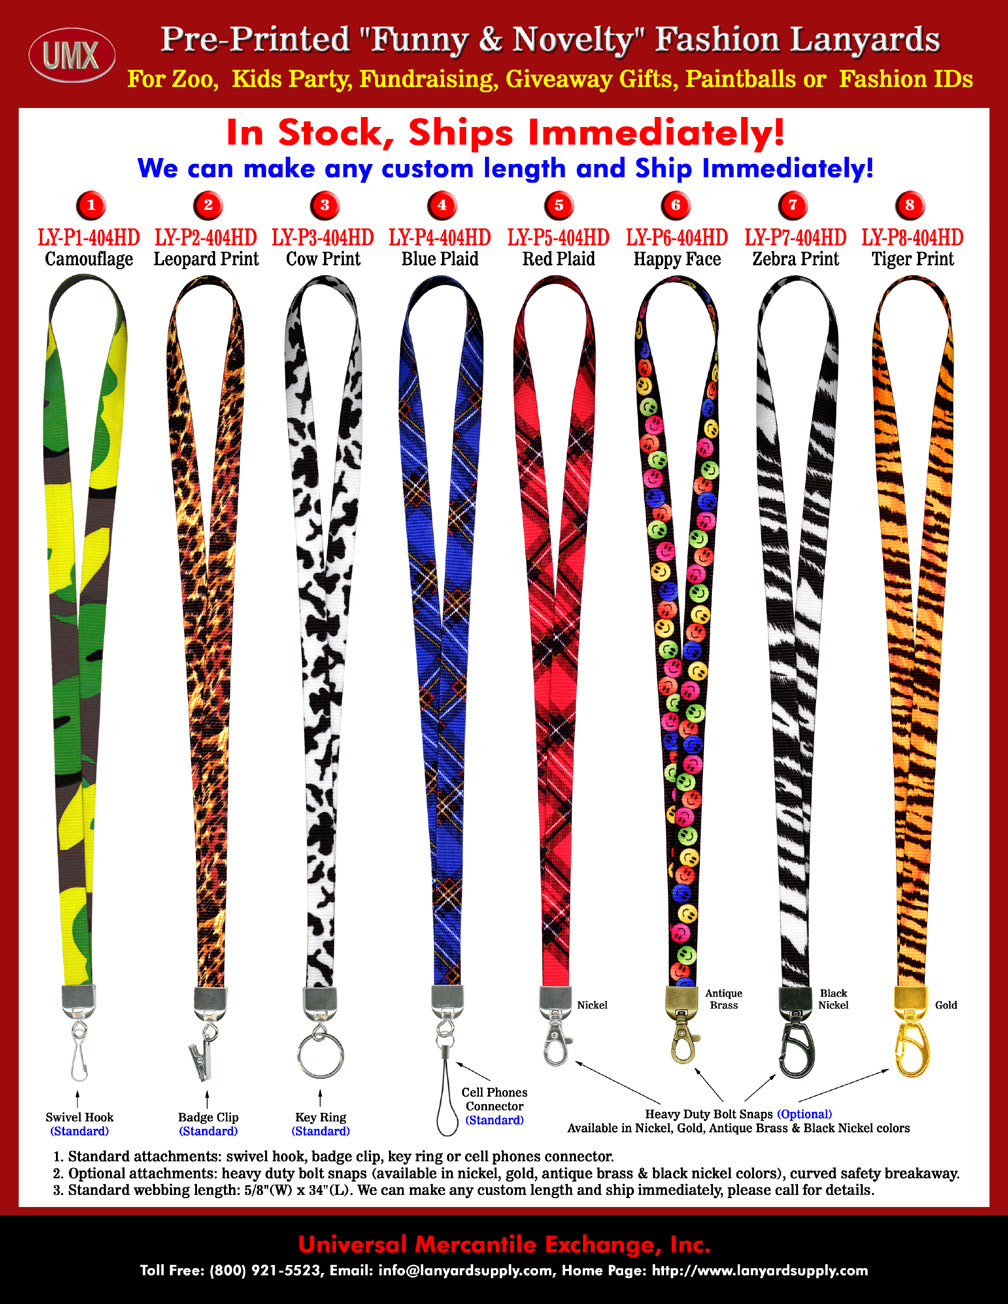 Zoo lanyards come with a variety of eye catching pre-printed wild world jungle themes or safari color patterns.